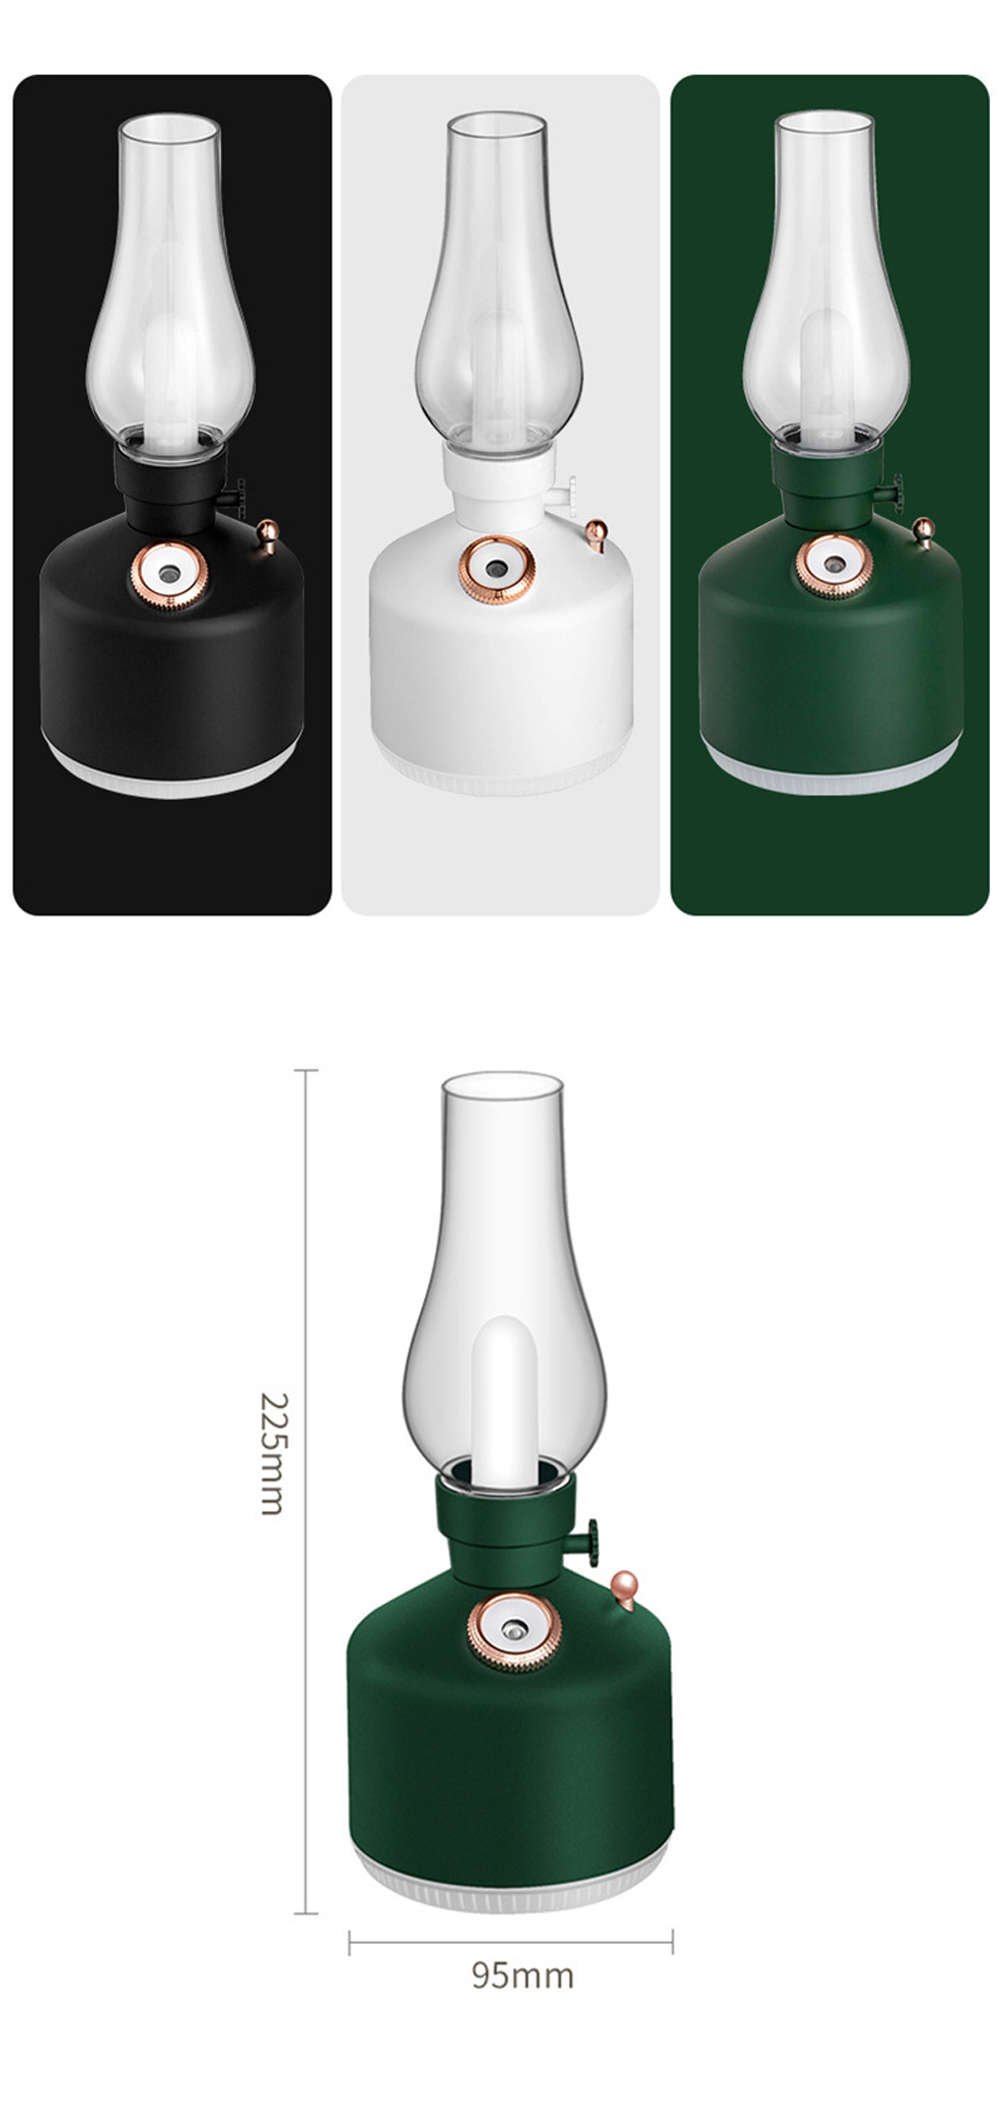 IPReereg-Colorful-Camping-Lights-2-Mode-Wireless-Humidifier-Portable-Retro-LED-Lights-Outdoor-Tent-L-1917723-5